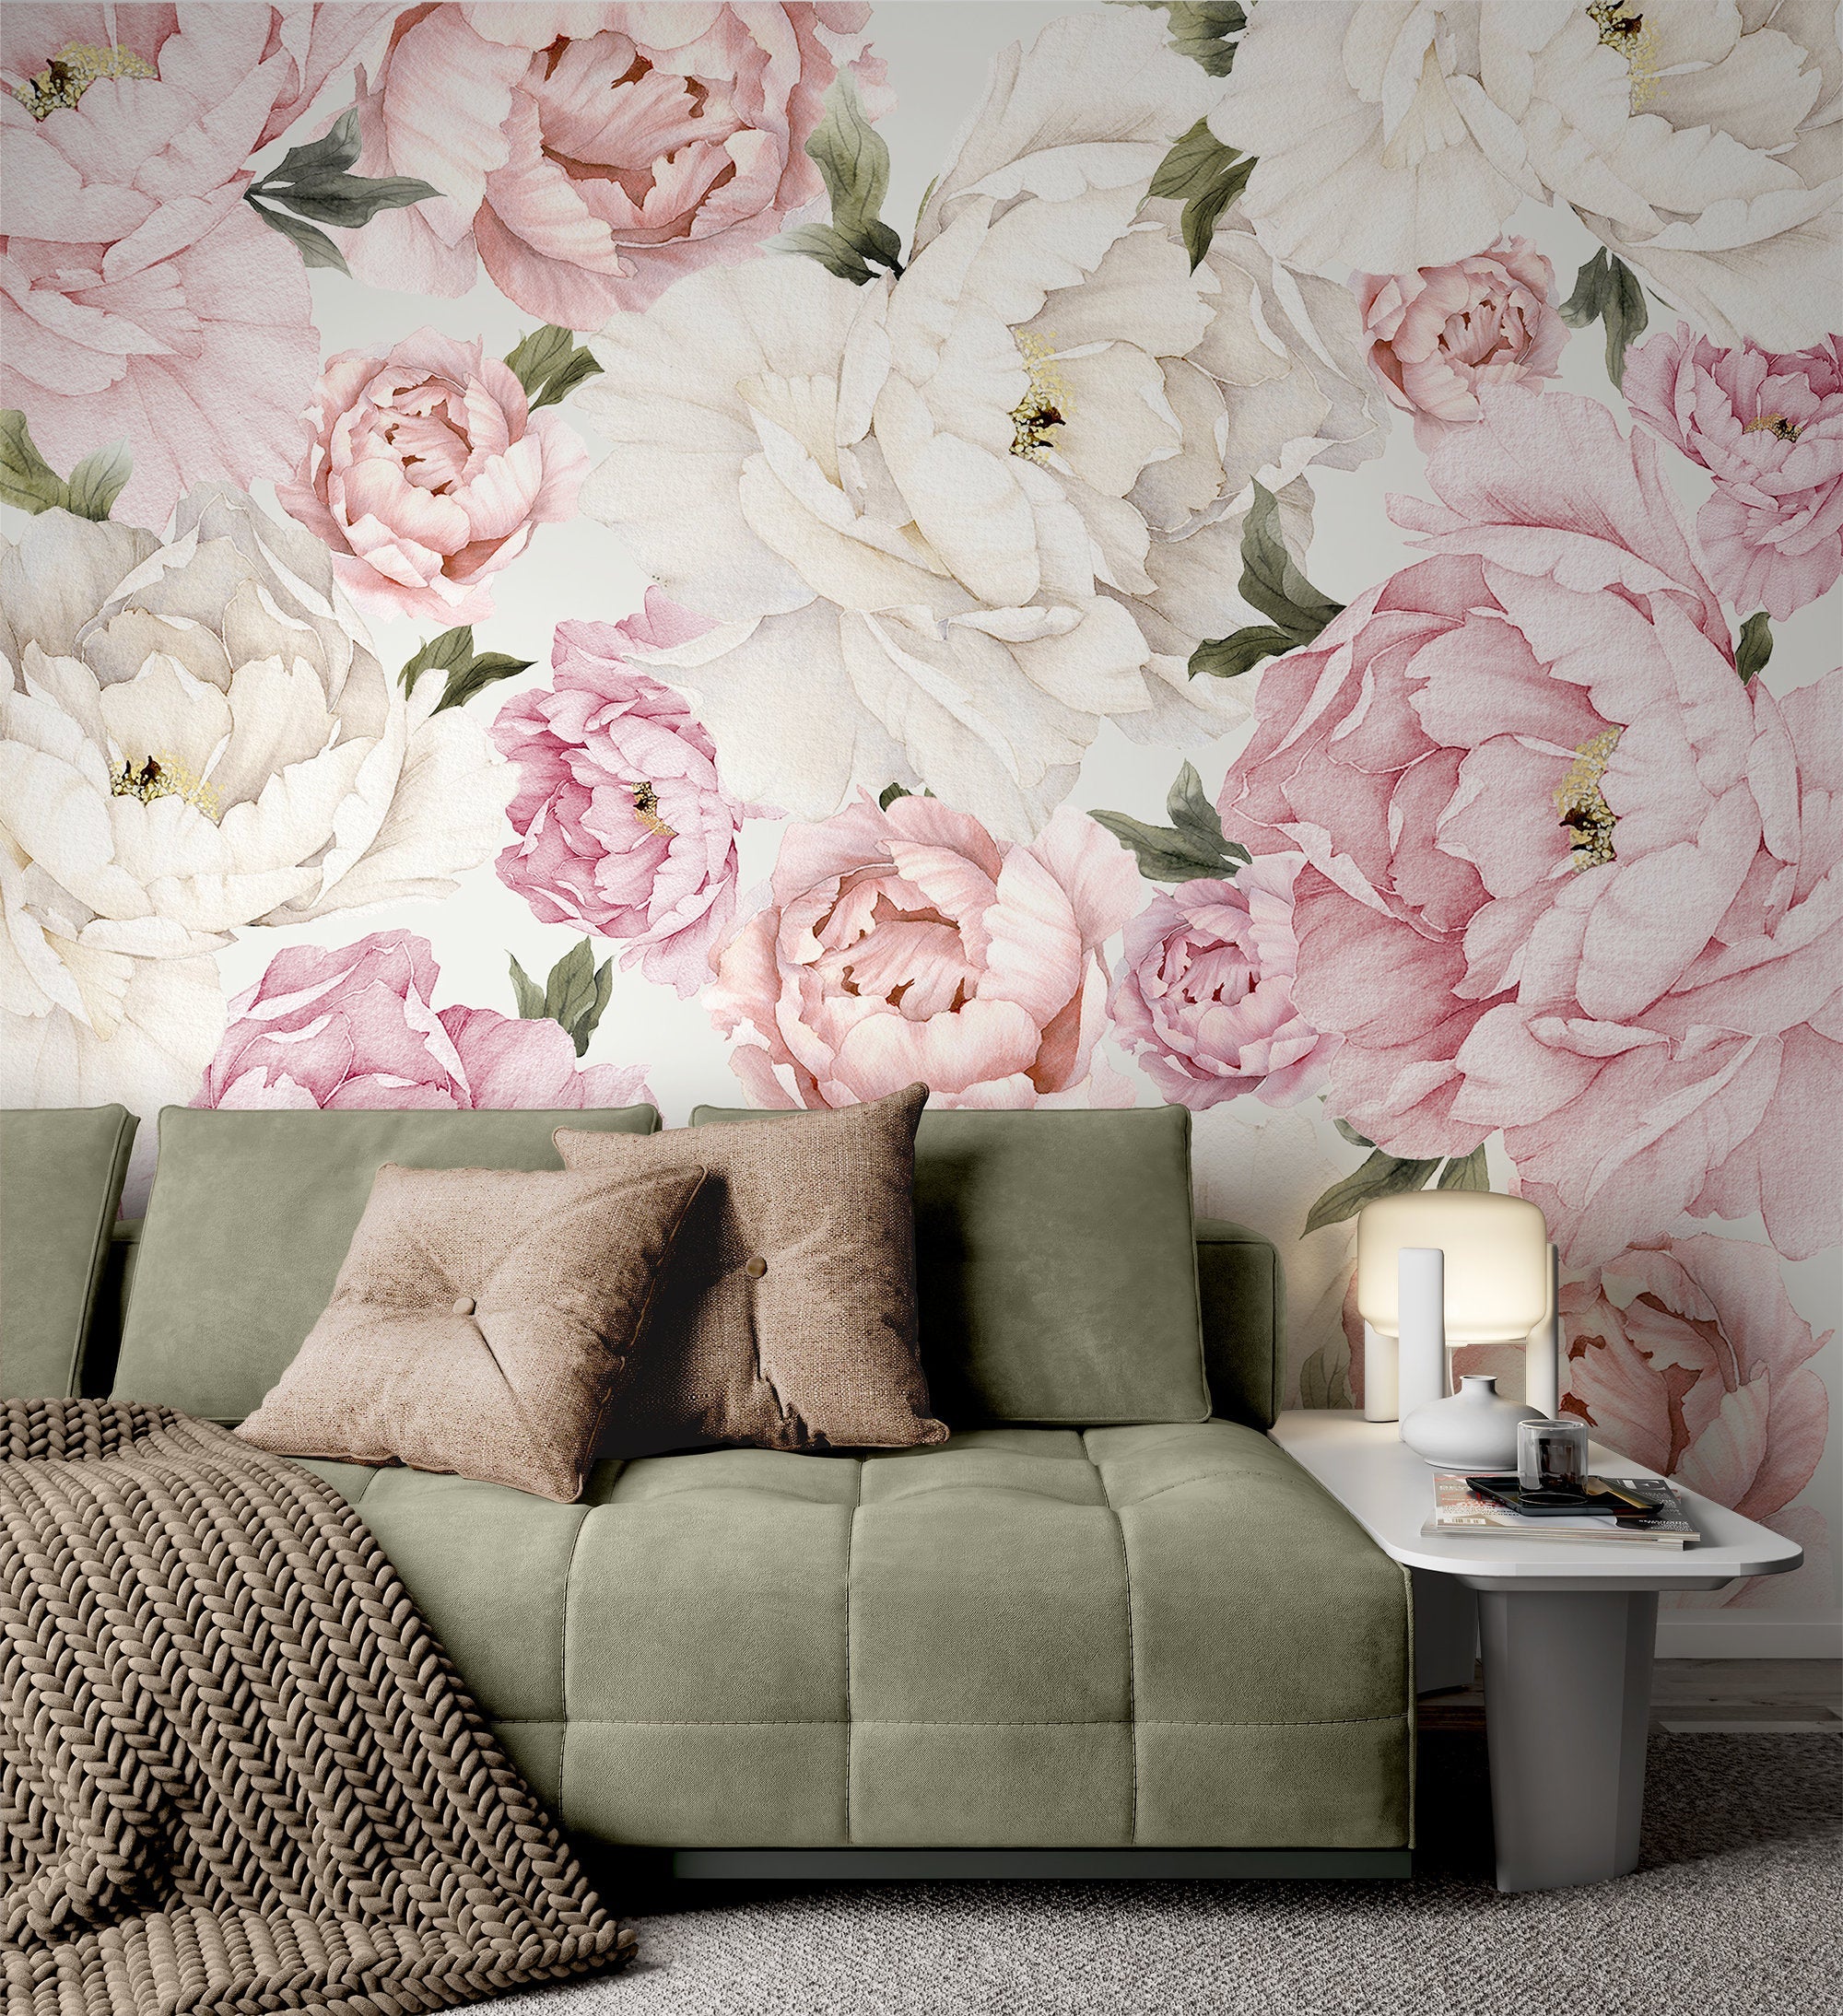 Pink and White Peony Flowers Peonies Floral Murals Wallpaper